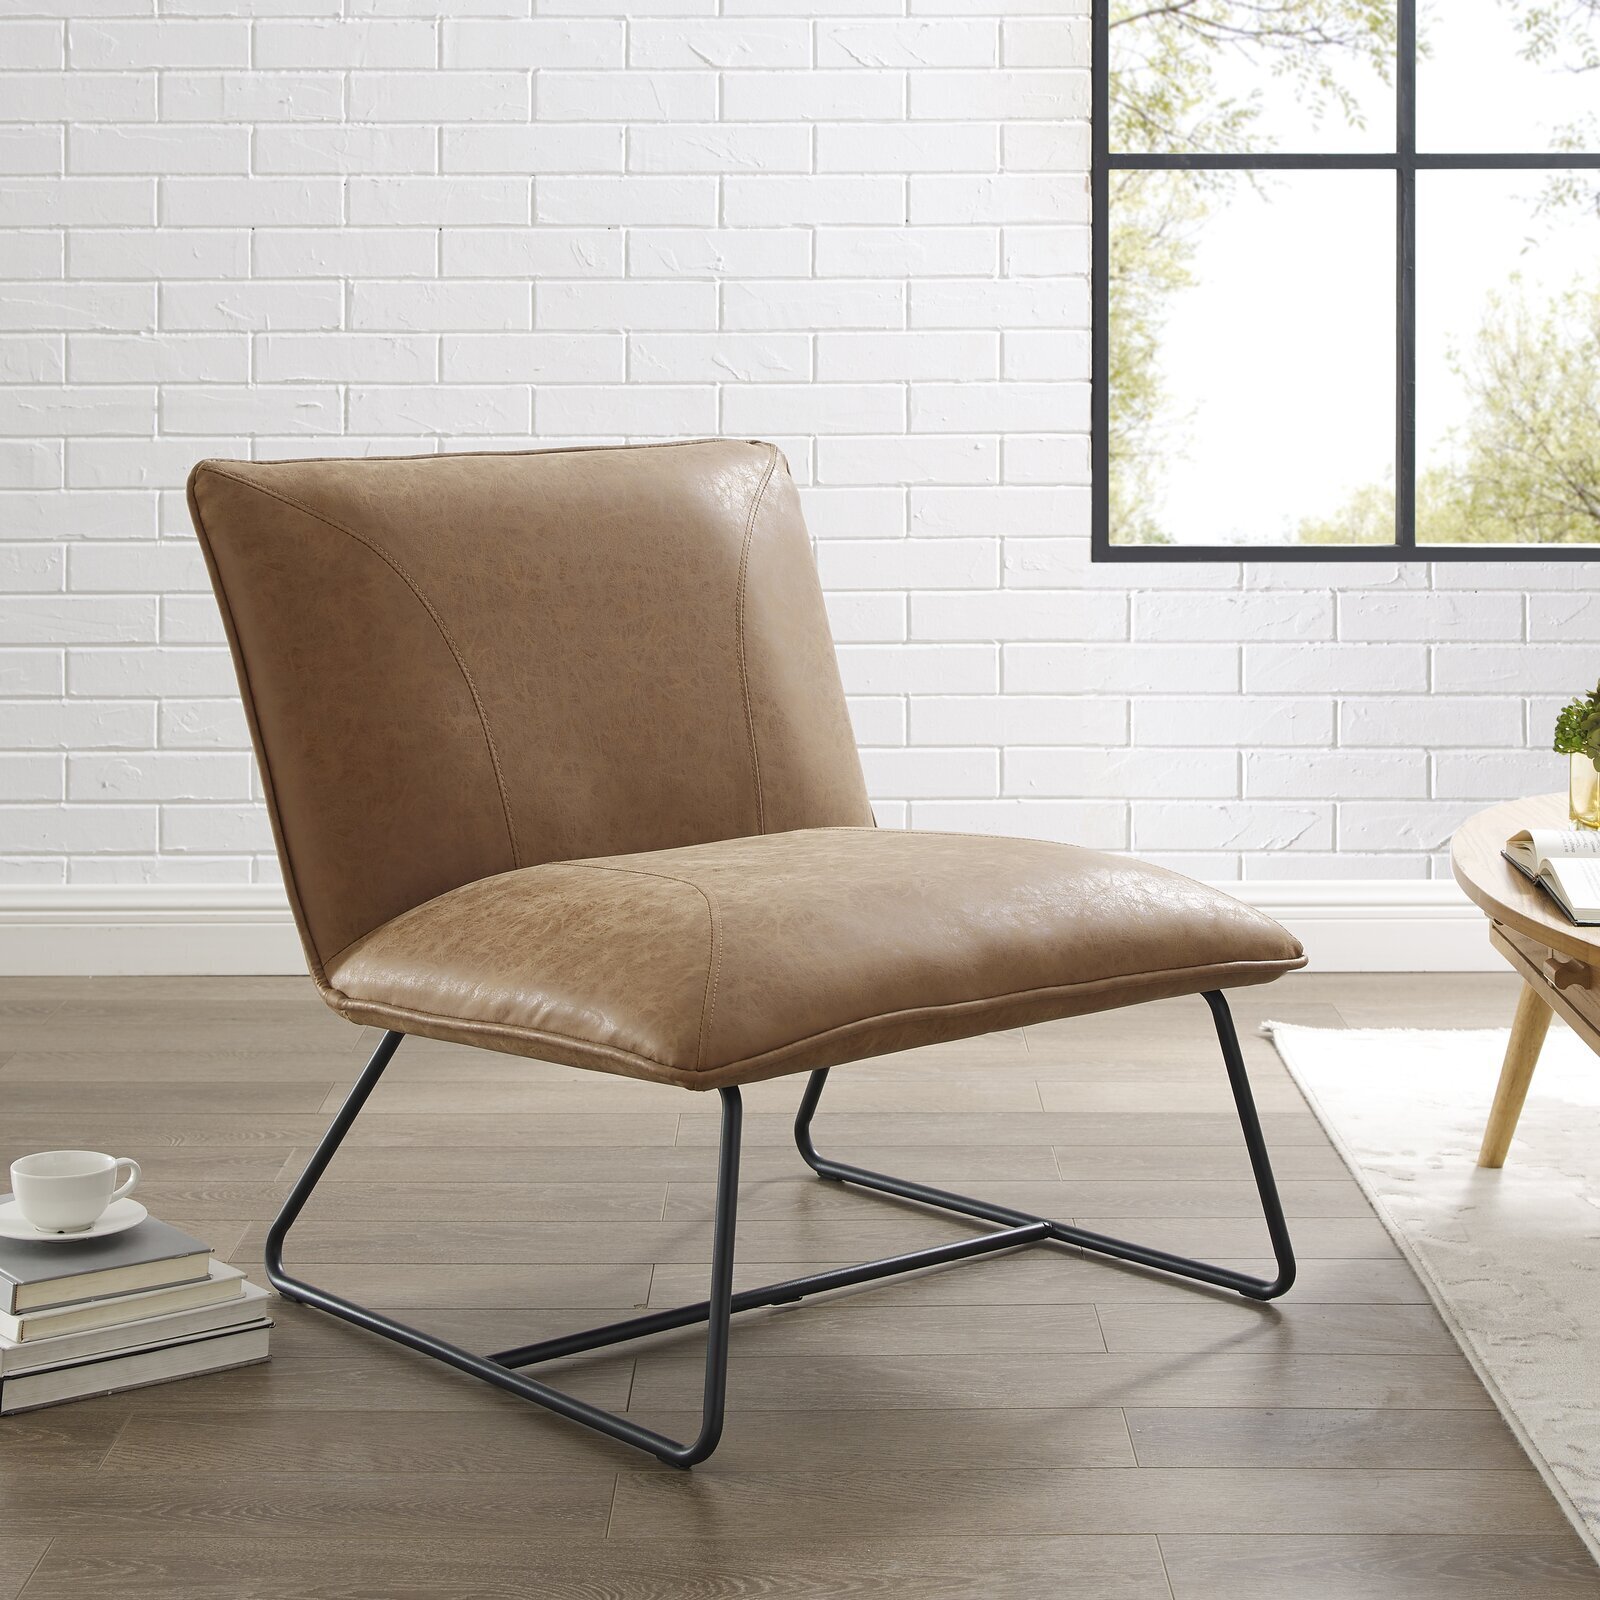 Chic Slender Industrial Armless Chair